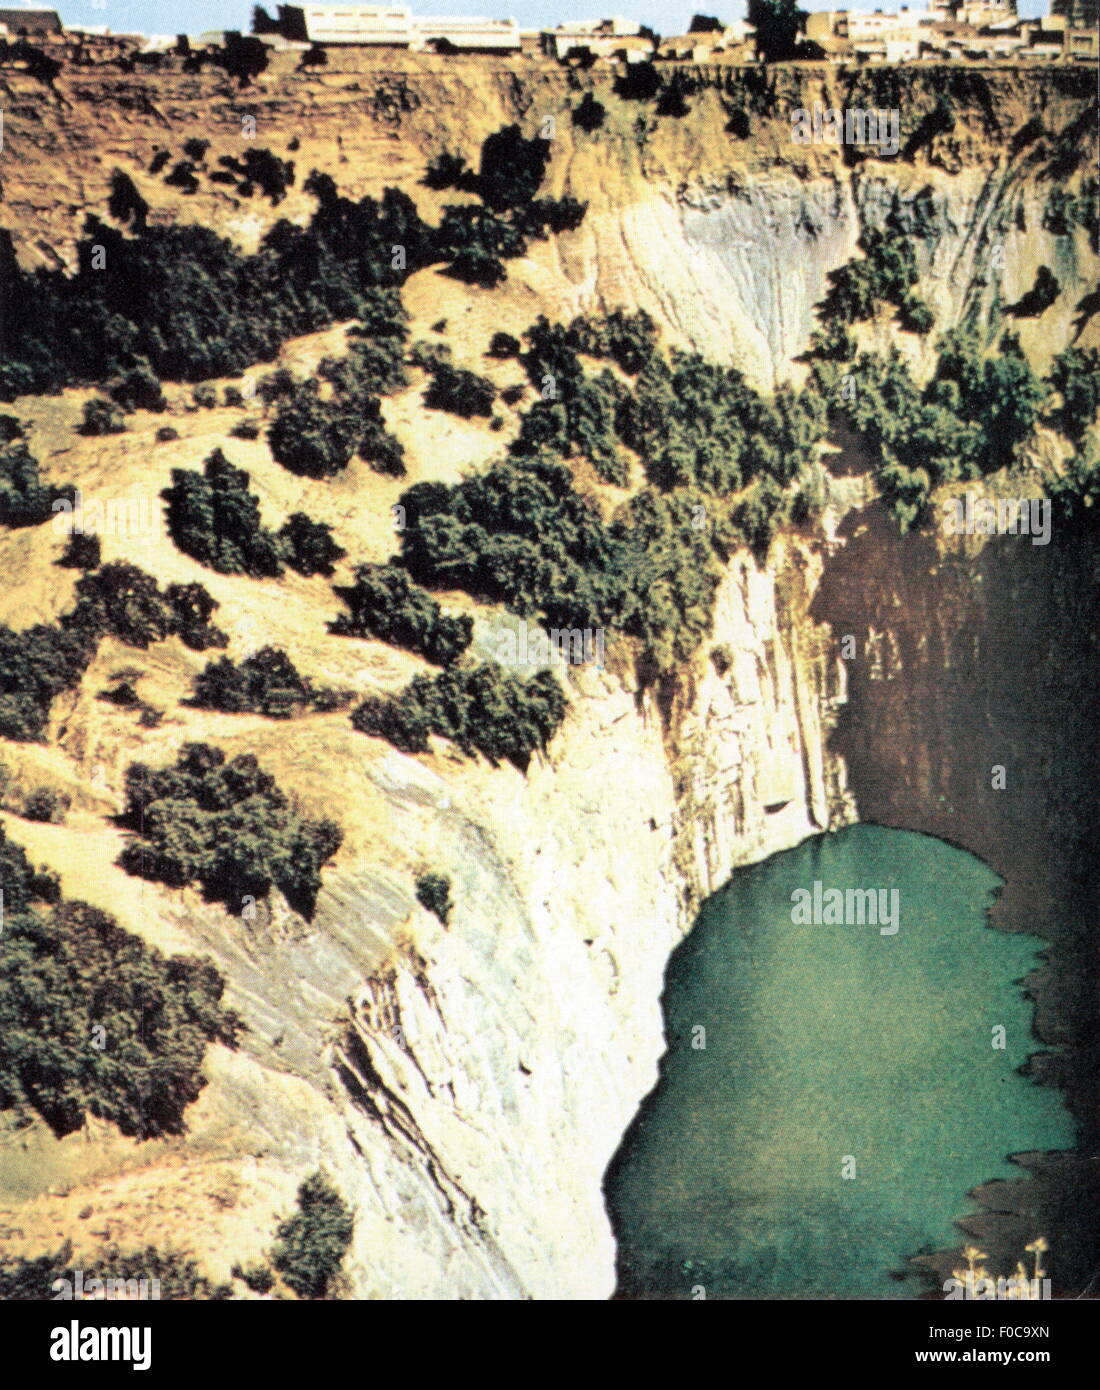 geography / travel, South Africa, Kimberley, city views / cityscapes, 'The Big Hole', 20th century, Additional-Rights-Clearences-Not Available Stock Photo